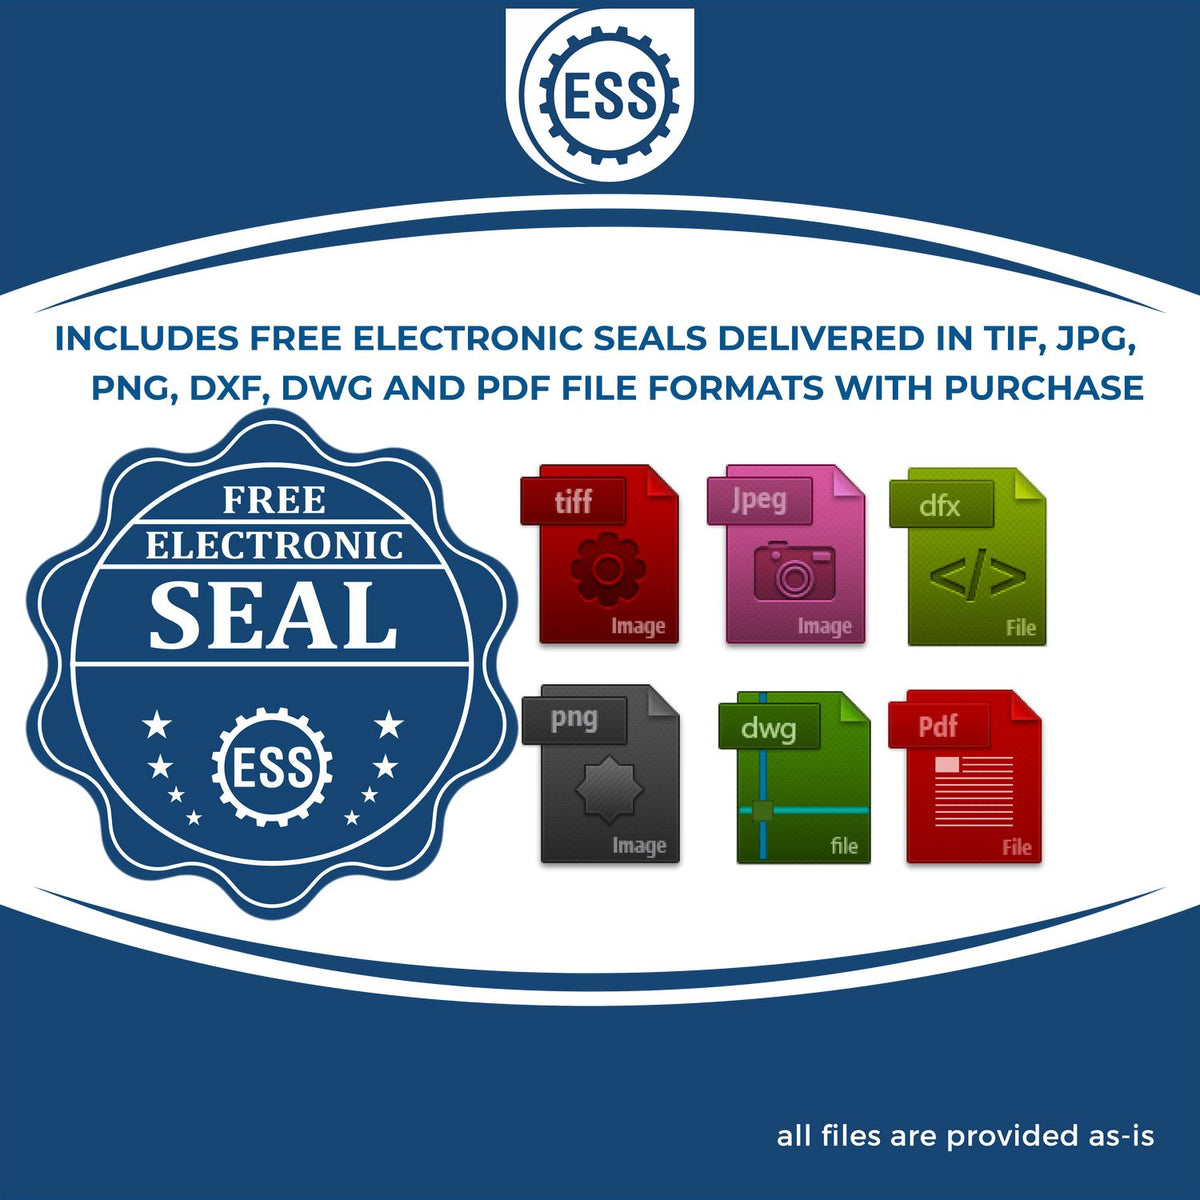 An infographic for the free electronic seal for the Hybrid Maryland Engineer Seal illustrating the different file type icons such as DXF, DWG, TIF, JPG and PNG.